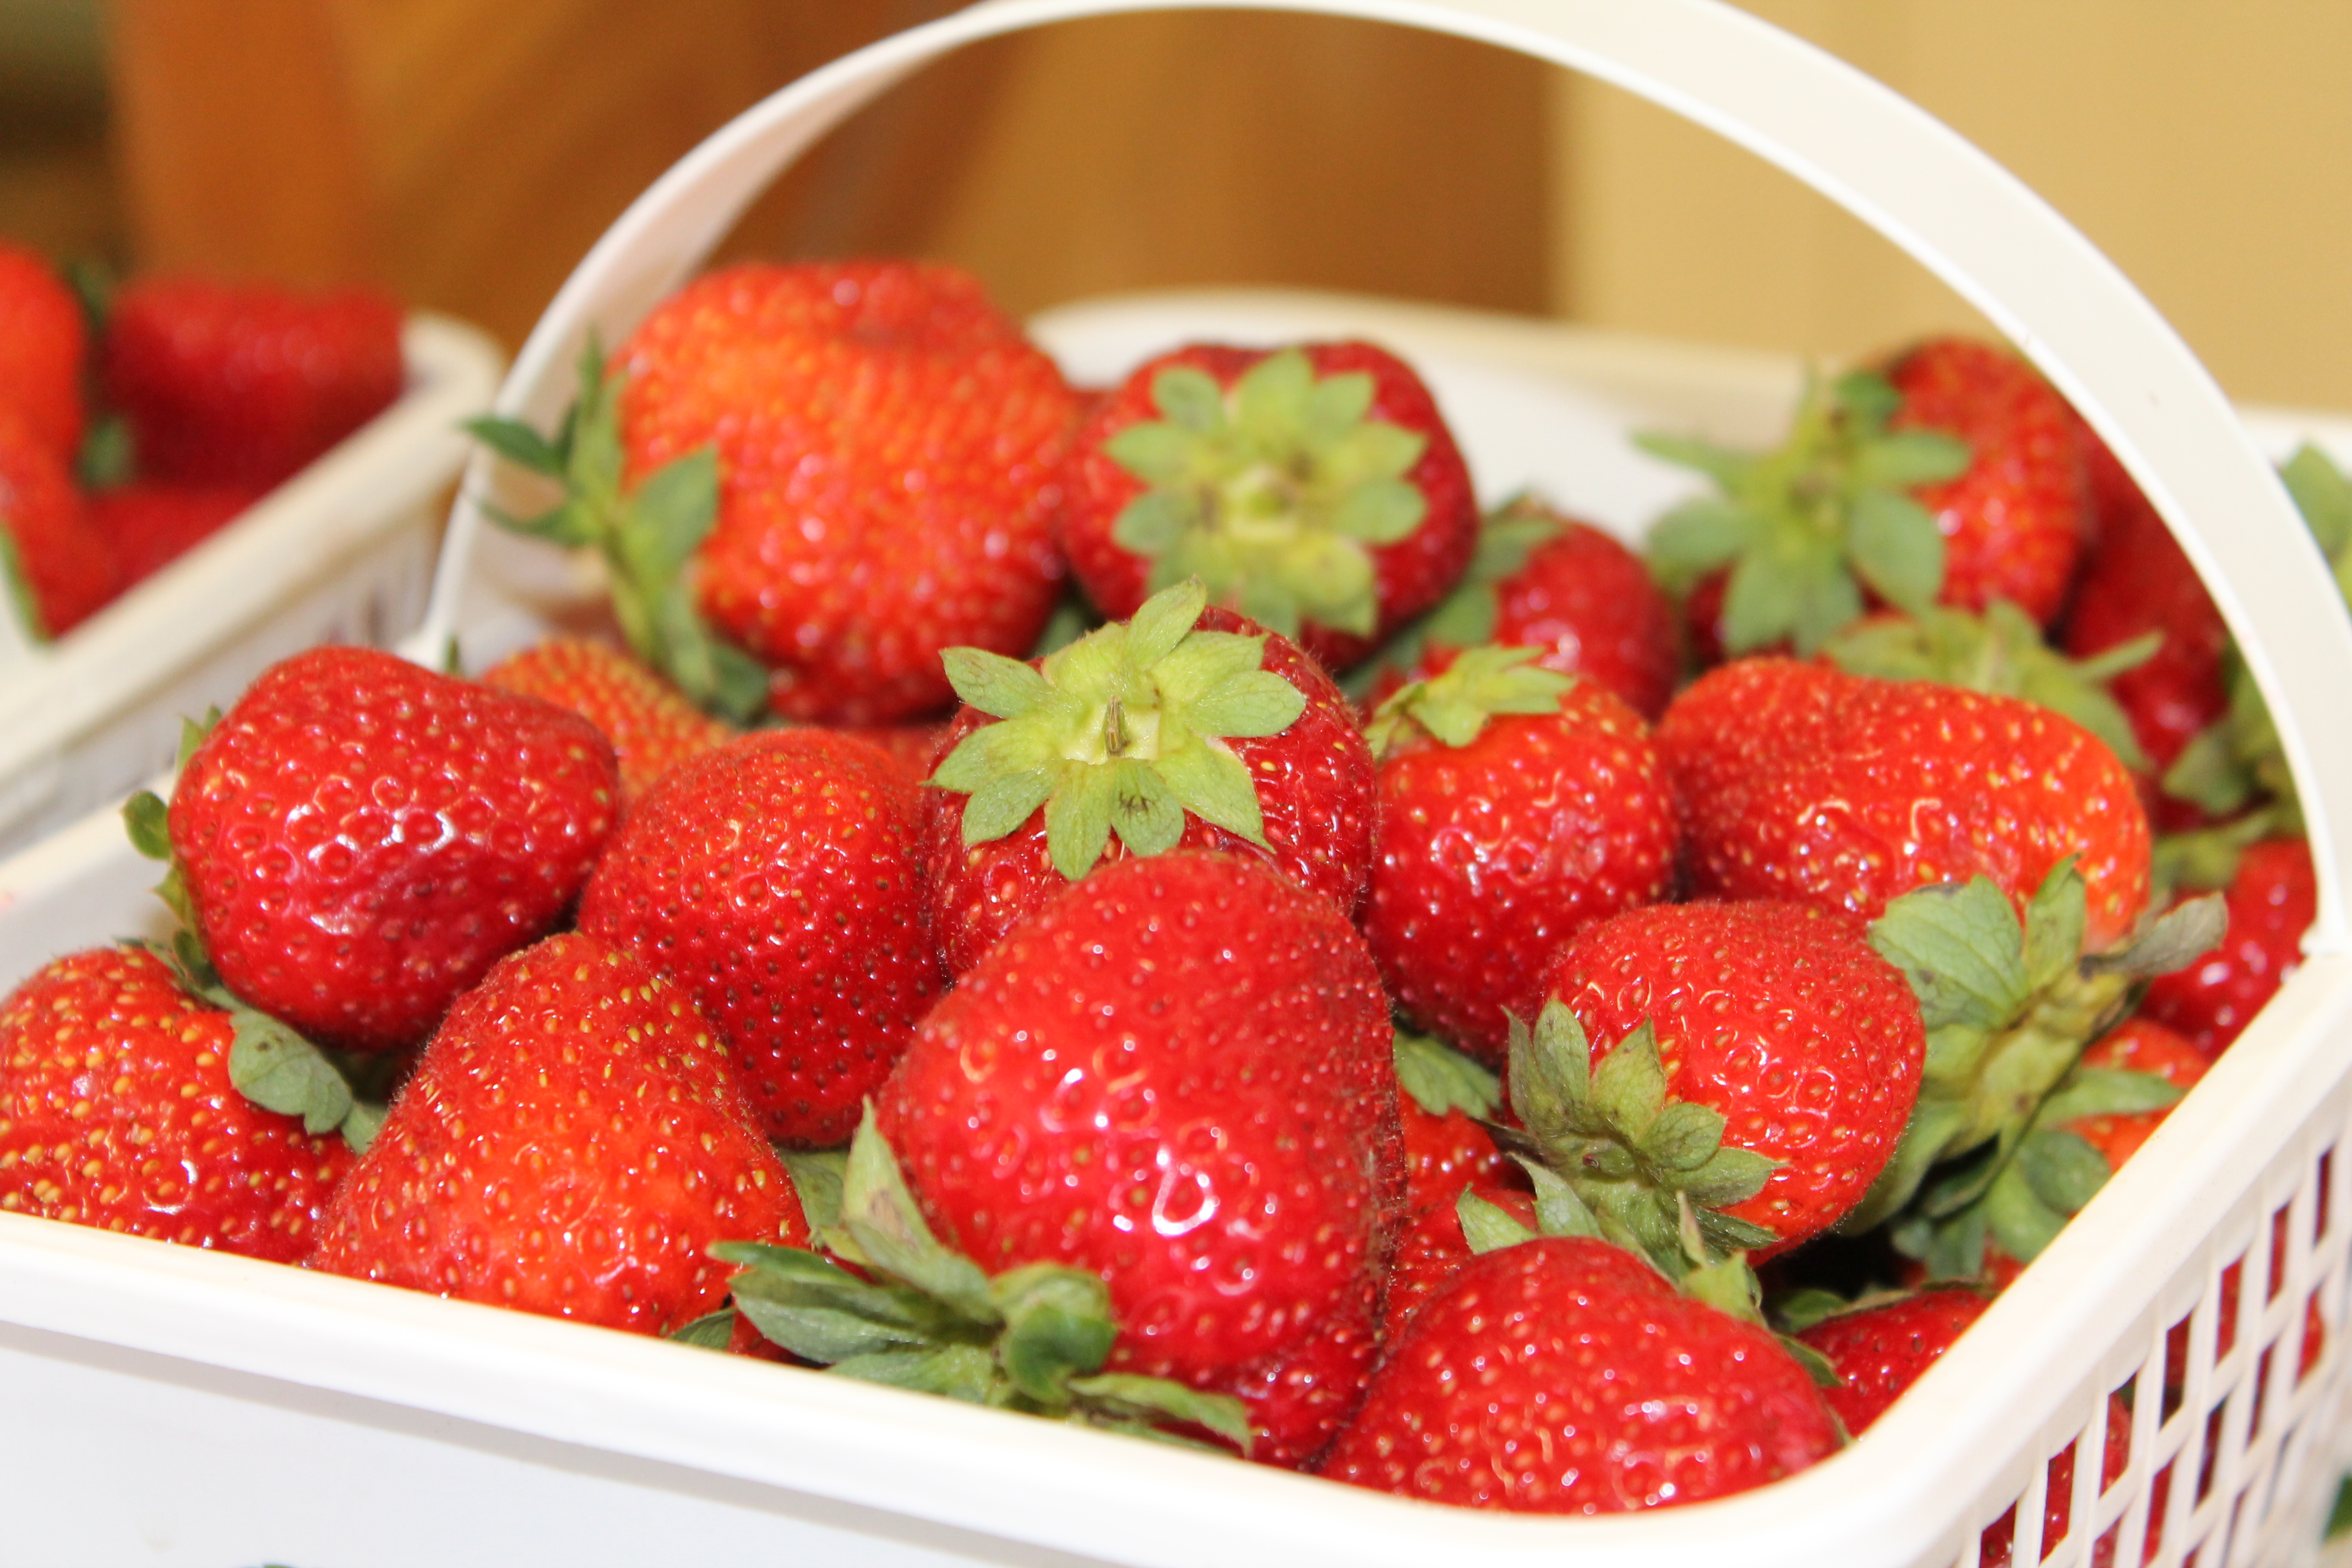 Strawberries in a white Foodland Ontario basket